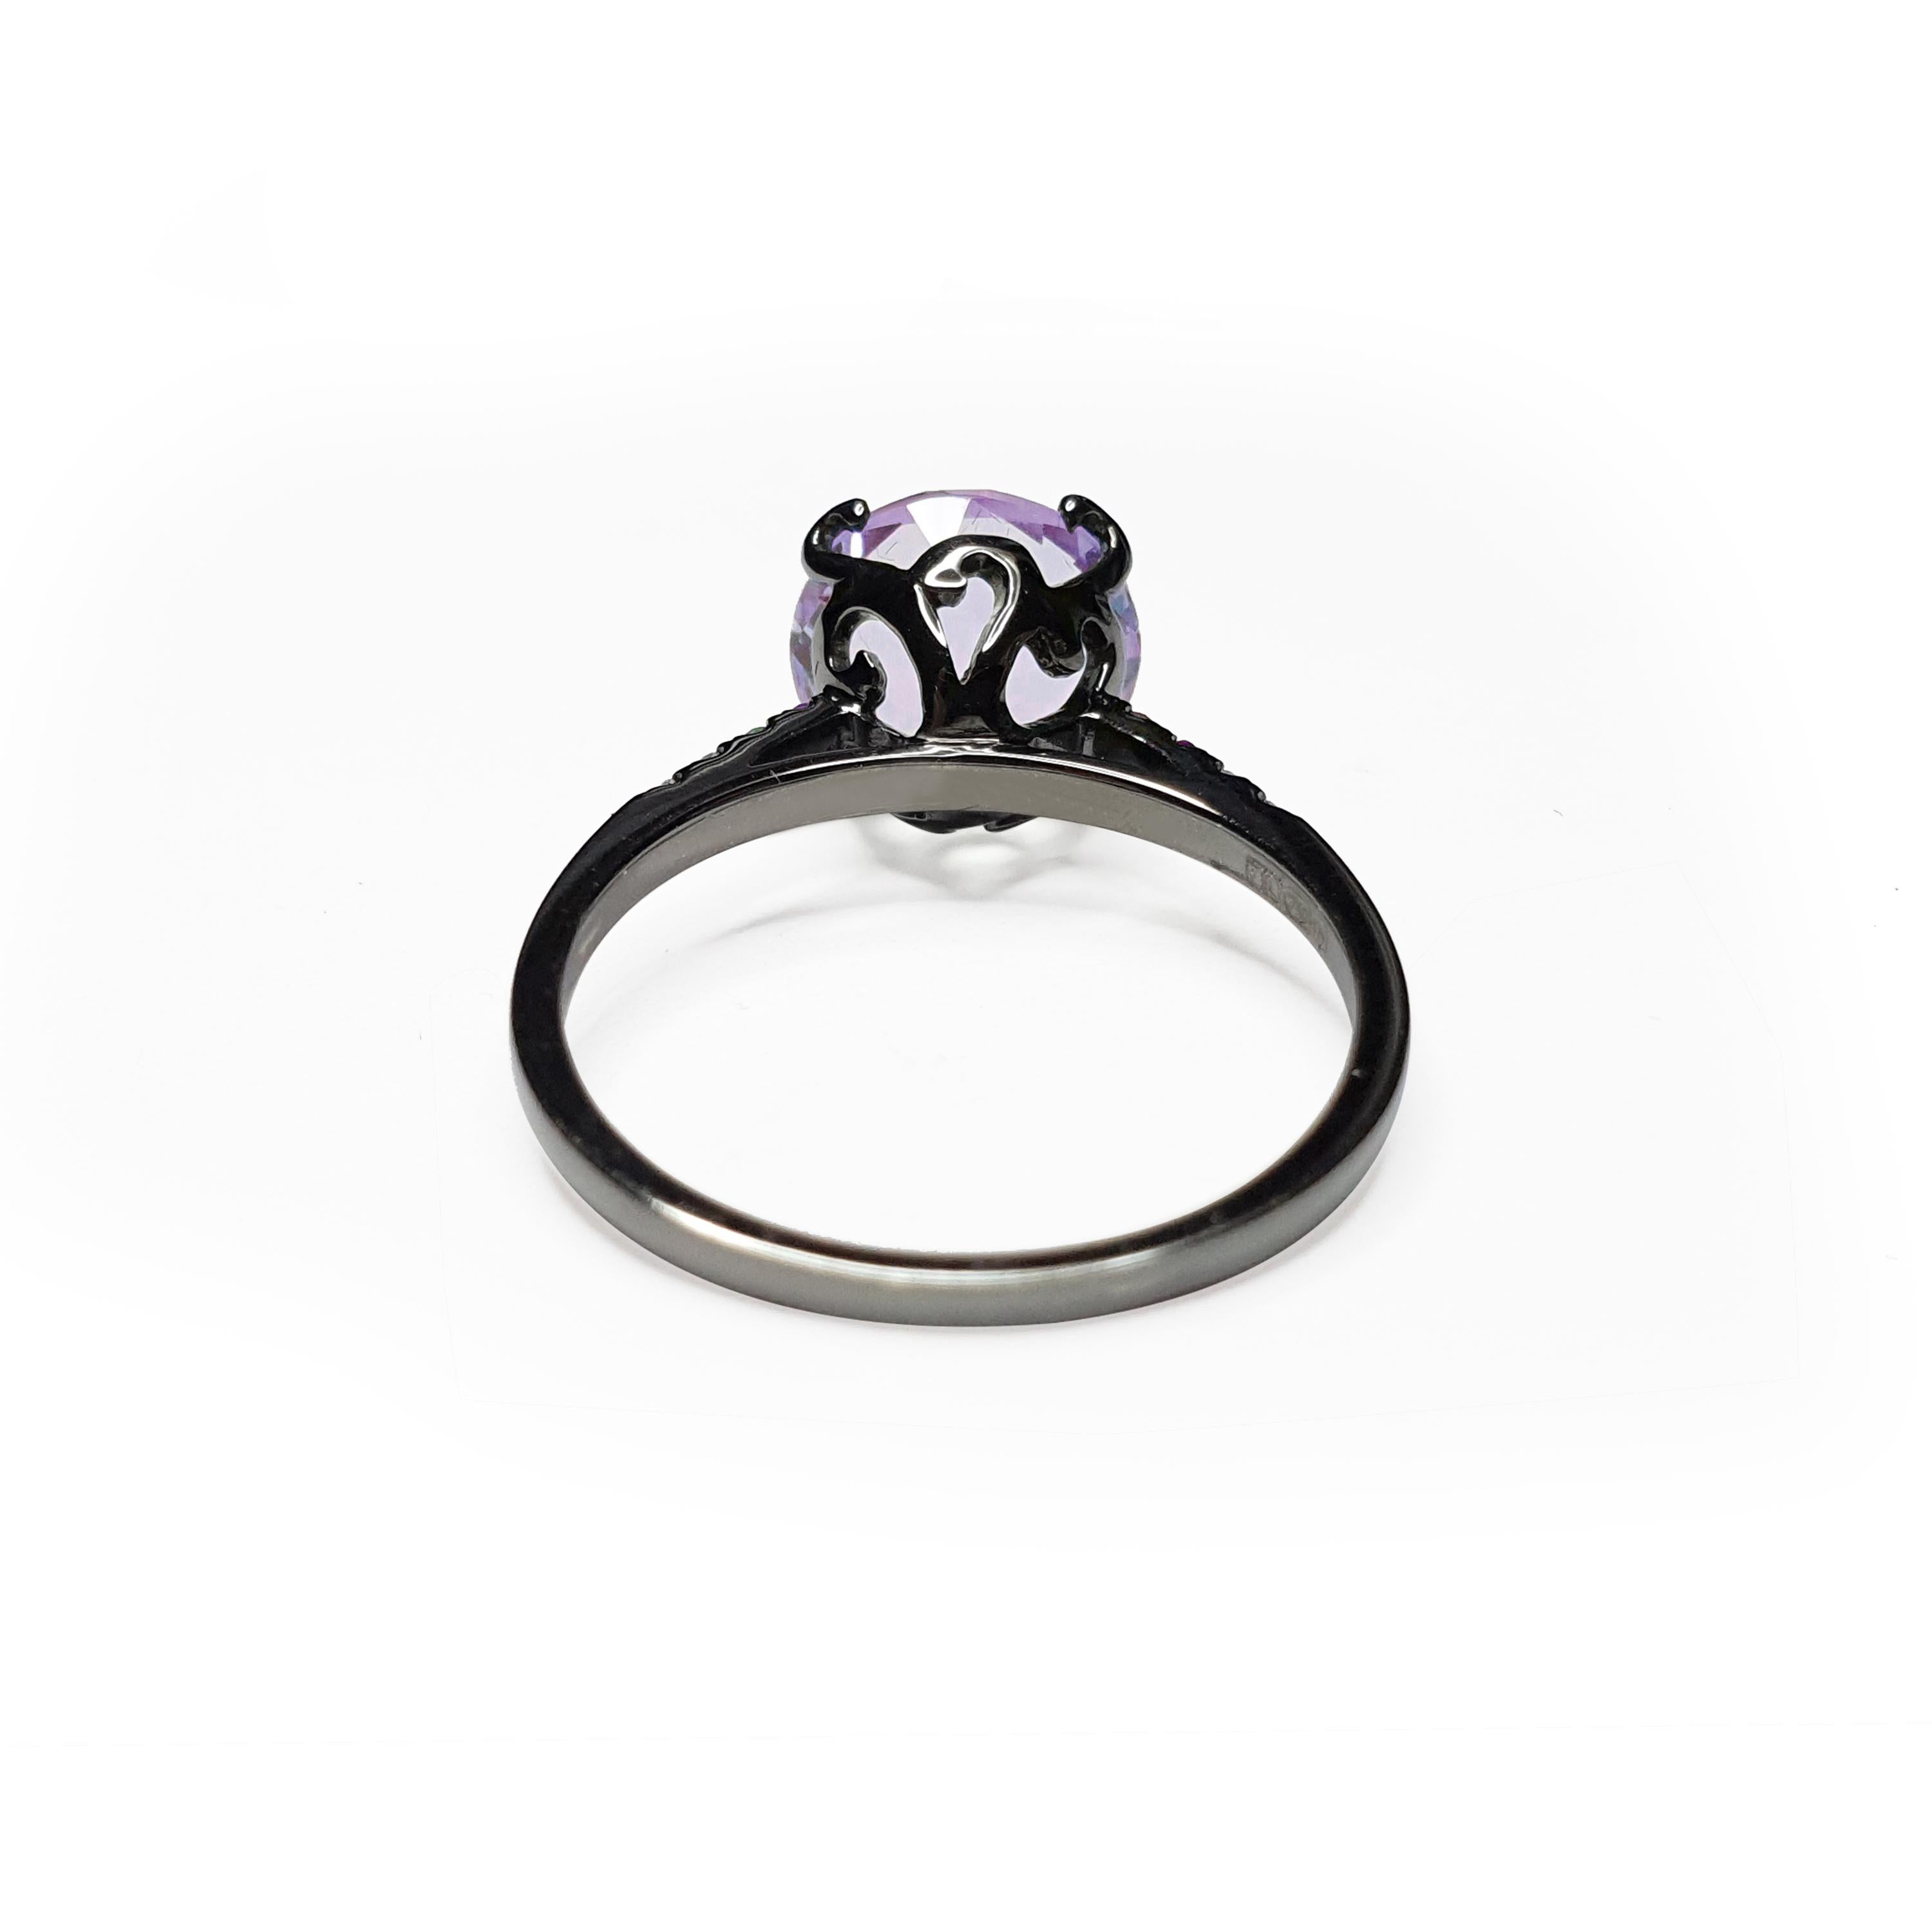 Description:
Whispering small round stone ring with a central 3ct purple amethyst and shoulder set 0.03ct white diamonds with  0.06ct purple amethysts. Set in black rhodium plate on 18ct white gold.

Available ring sizes: L (UK) / 5 3/4 (US), M (UK)